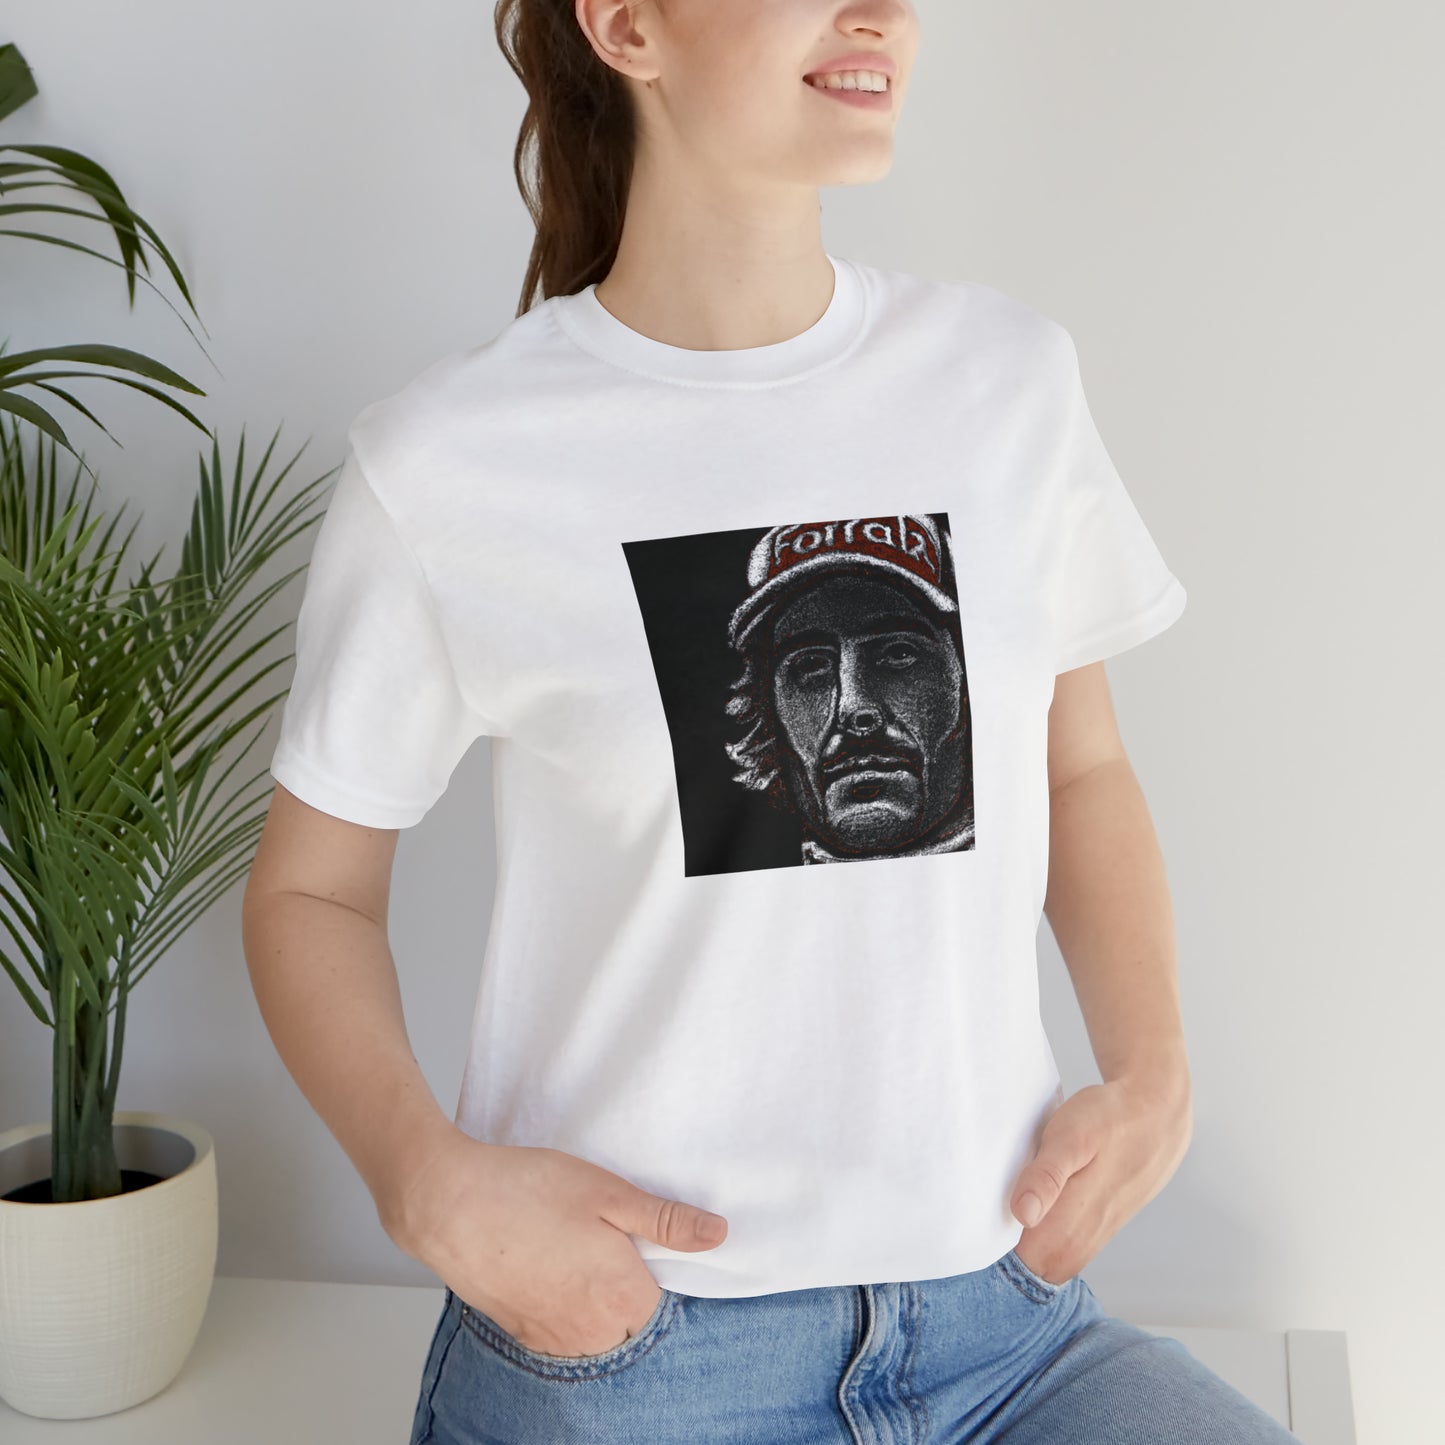 Giuseppe Chicchioni. A revolutionary streetwear designer from Italy whose collections in the 1990s were inspired by the classic glamour of Italian style from the 1950s and 60s. He was known for his bold colors, intricate-Tee